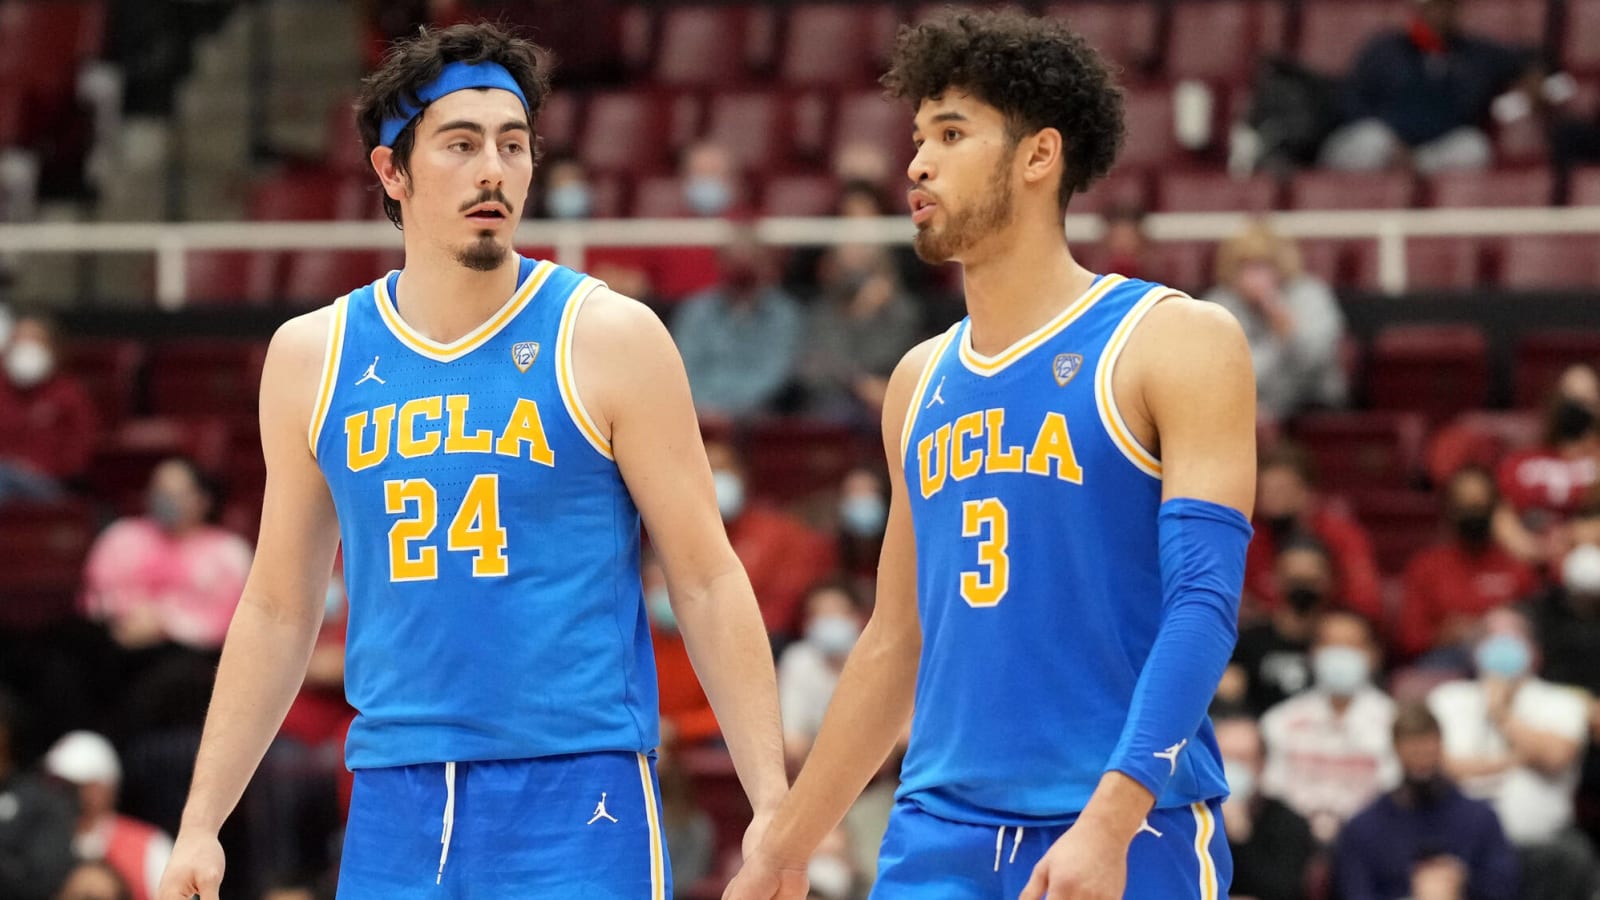 Watch: UCLA stars Johnny Juzang and Jaime Jaquez Jr. tour sunny UCLA before March Madness in latest 'Put You On'